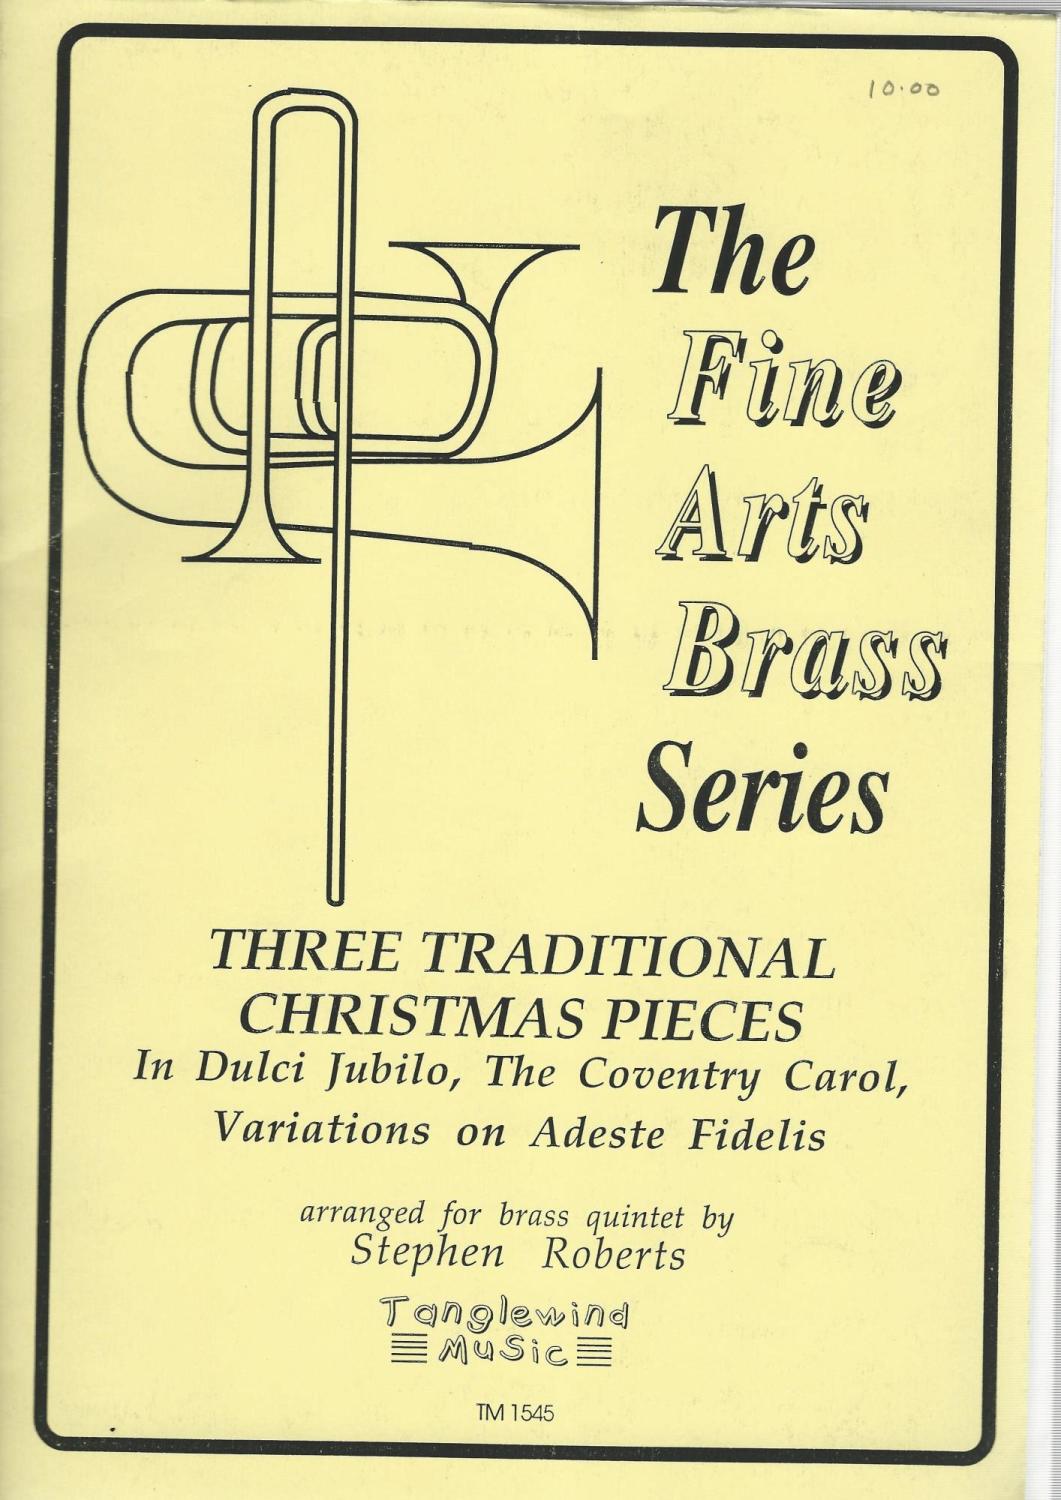 Three Traditional Christmas Pieces for Brass Quintet - Stephen Roberts